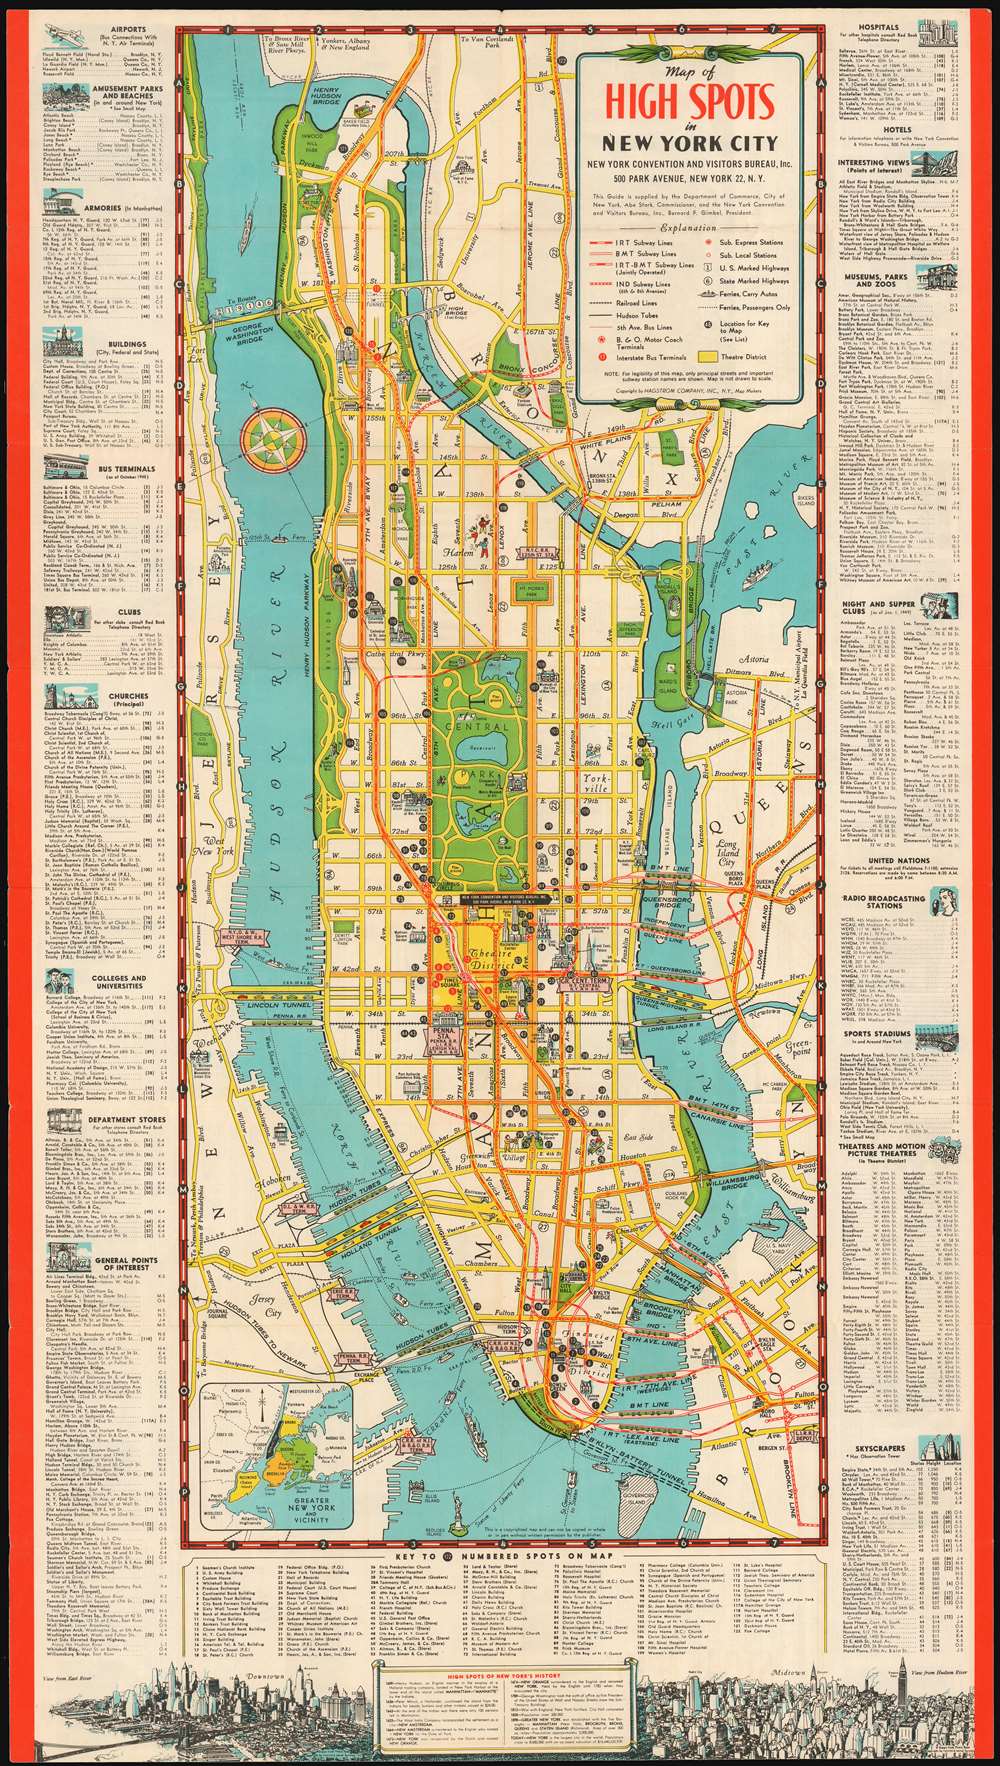 new york city map Map Of High Spots In New York City Geographicus Rare Antique Maps new york city map